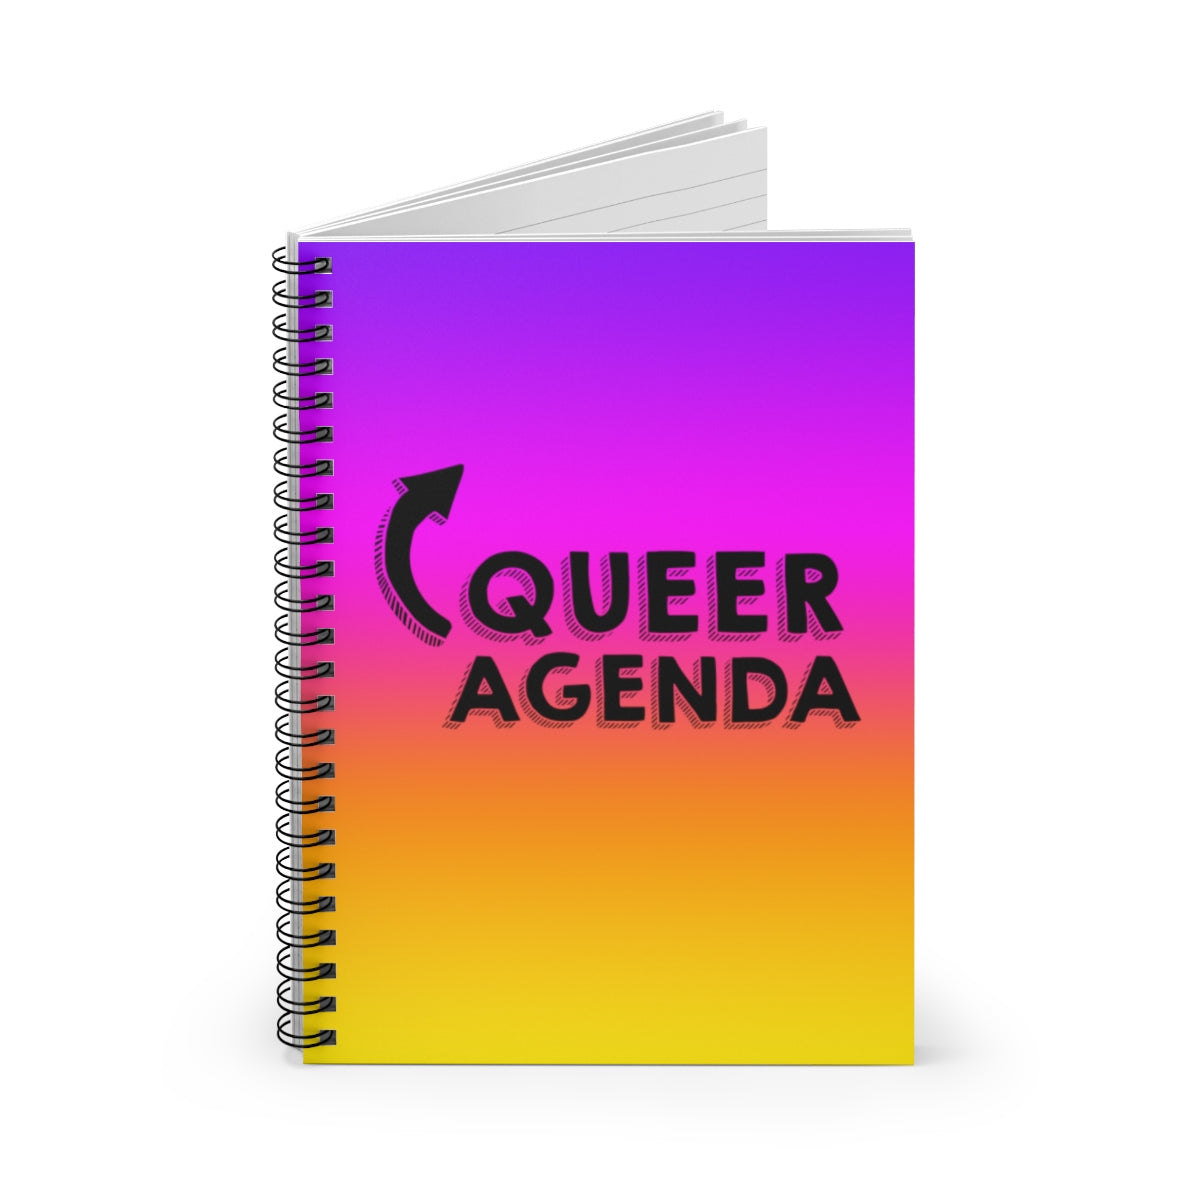 Queer Agenda Spiral Notebook - Purple, Orange, Yellow - LGBTQIA+, Paper products, HEED THE HUM